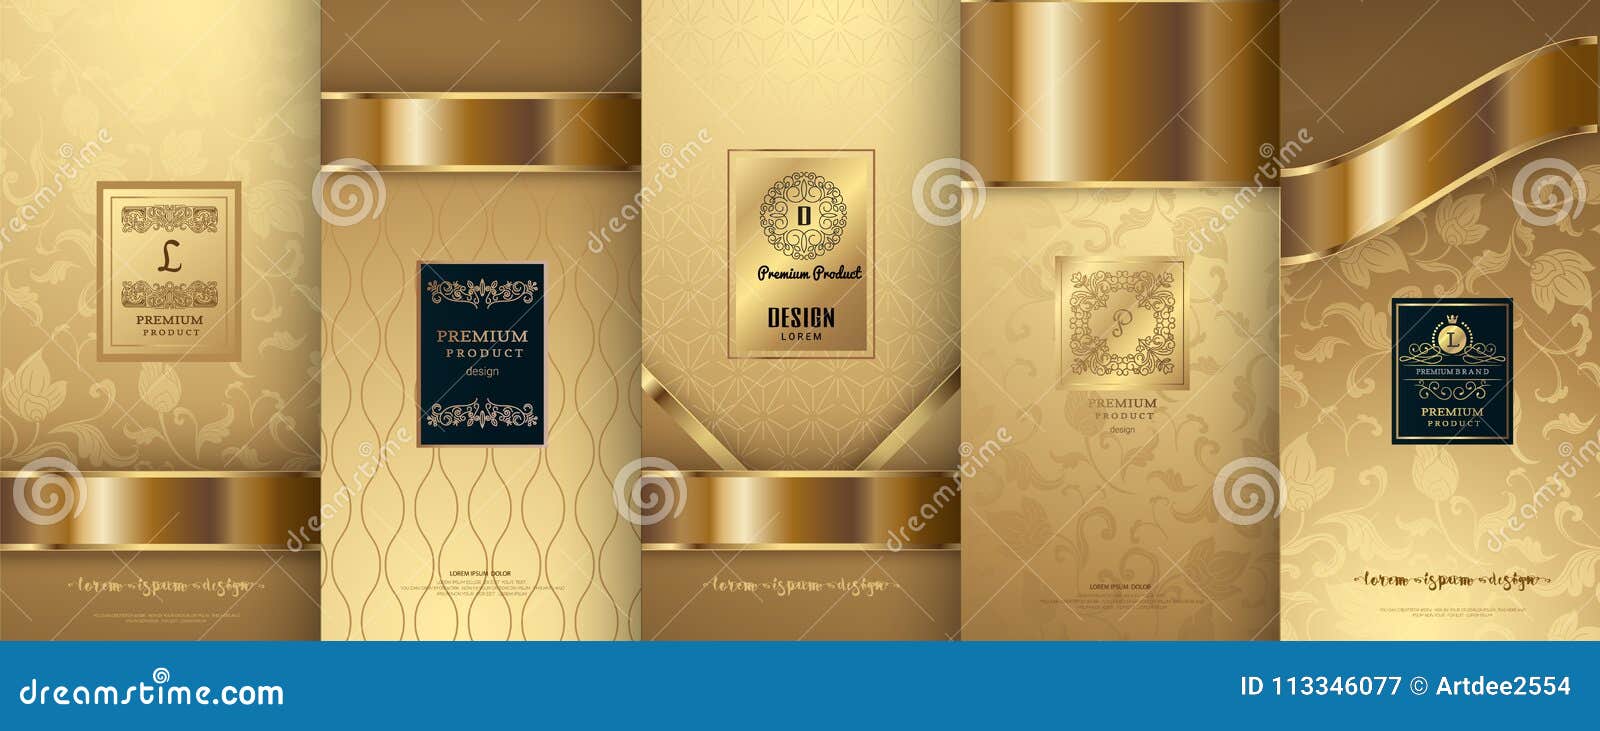 collection of  s,labels,icon,frames, for packaging, of luxury products.for perfume,soap,wine, lotion. made wit